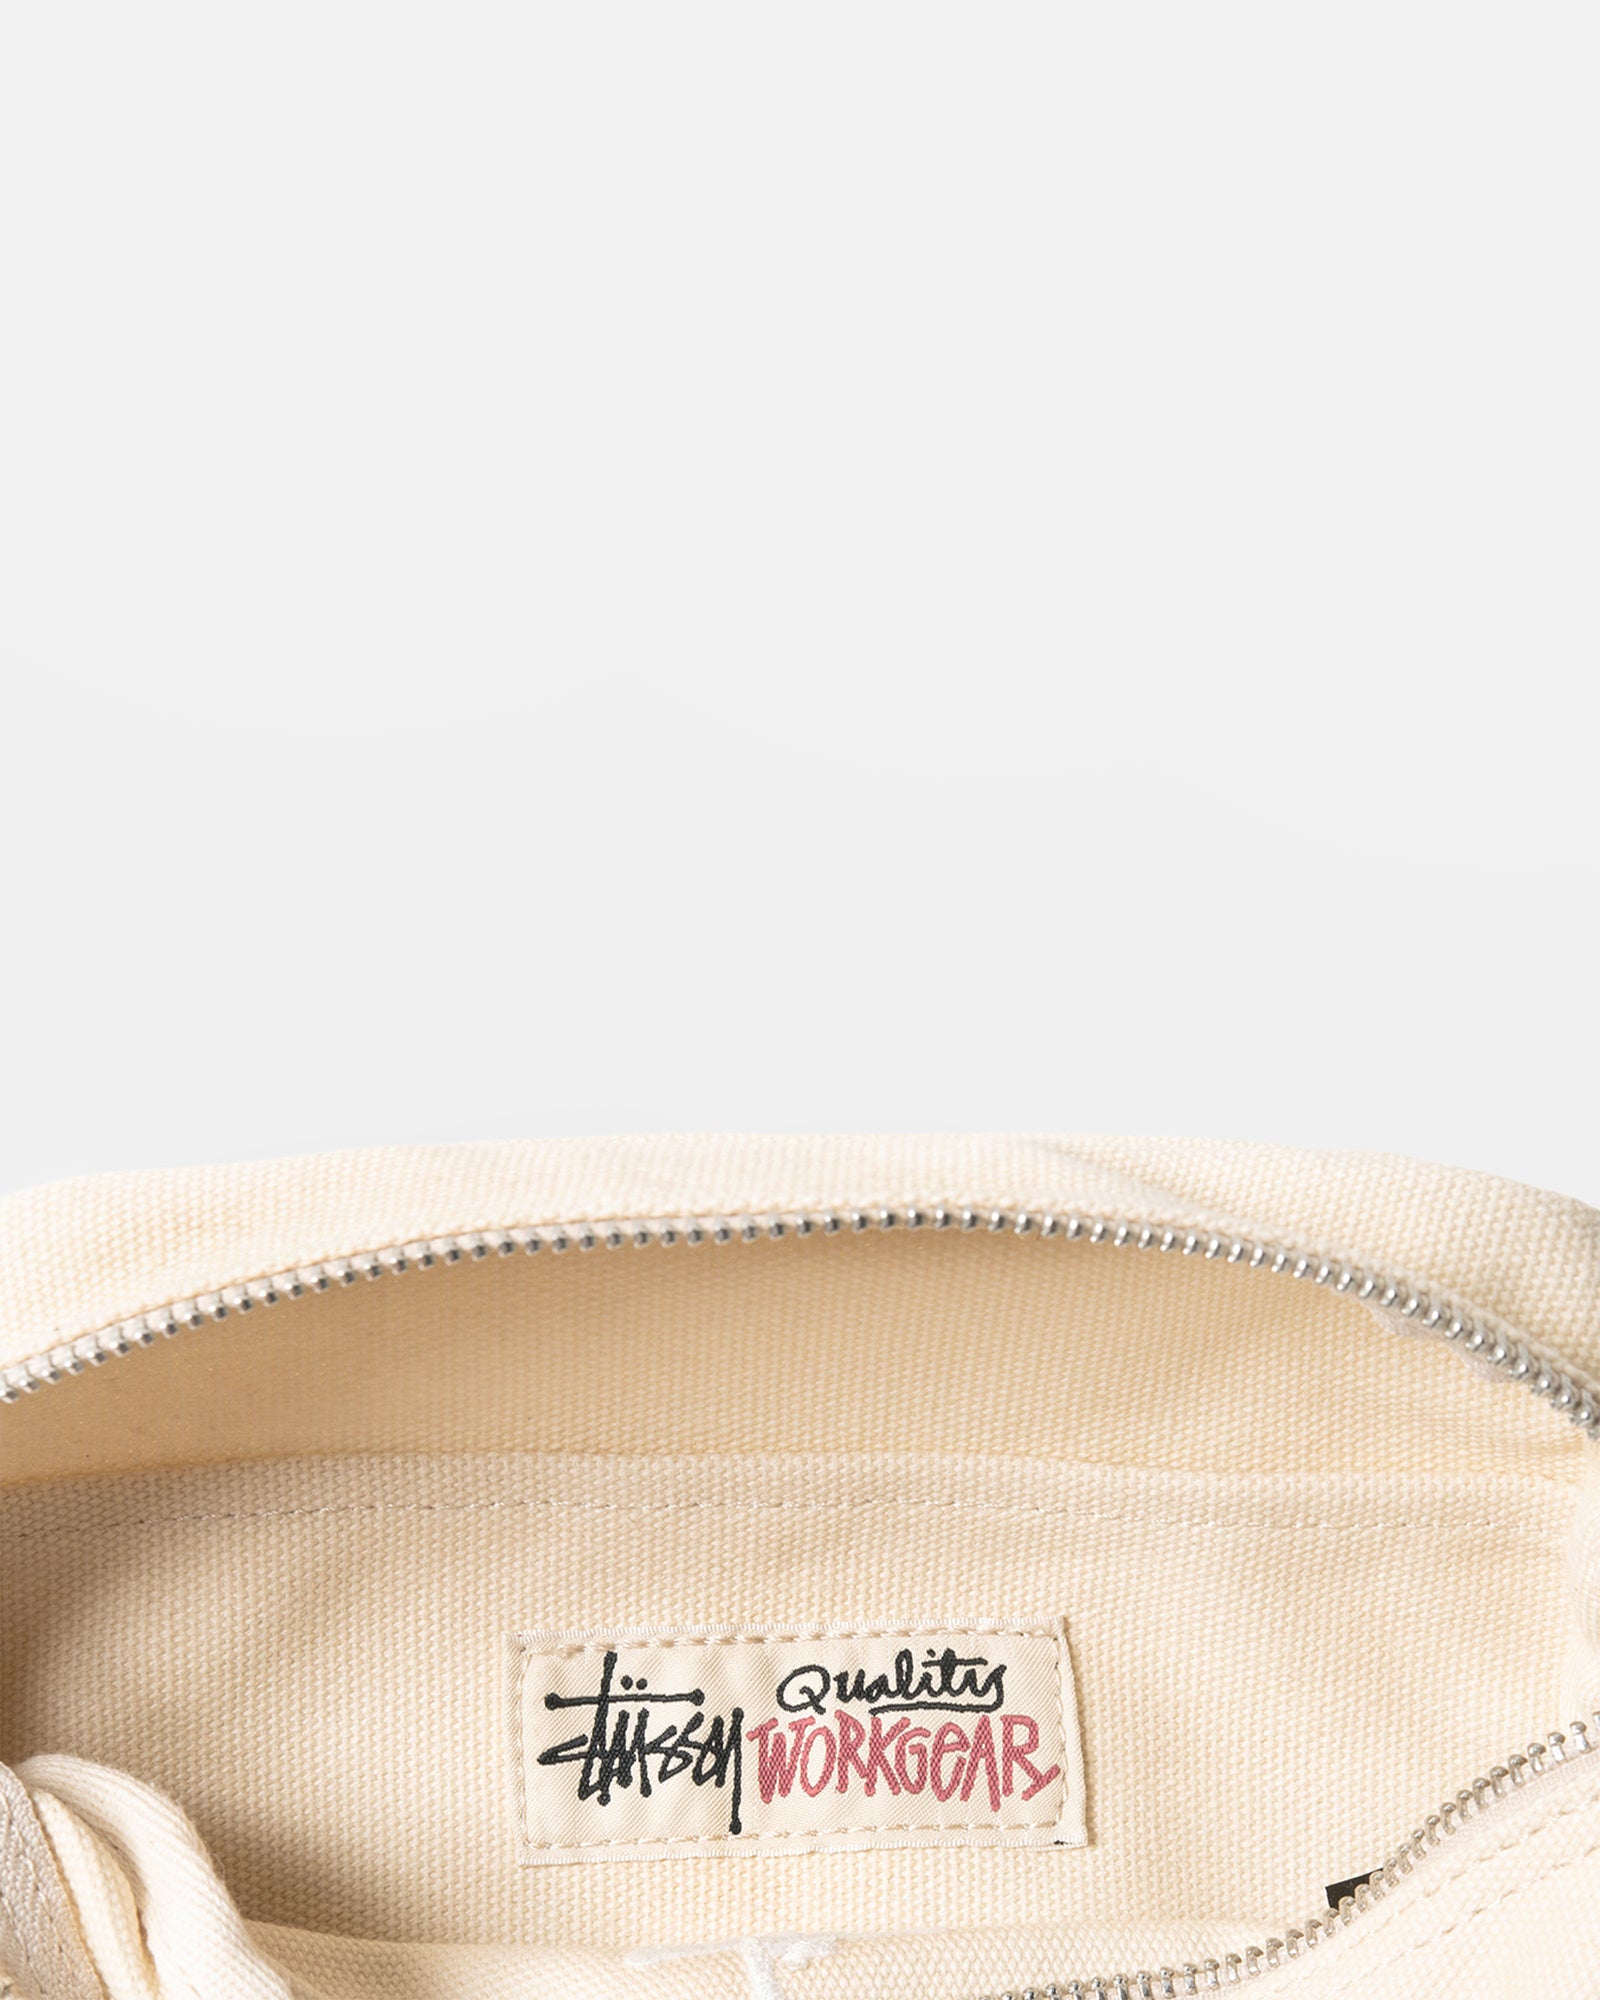 Stüssy Canvas Side Pouch Natural Accessories